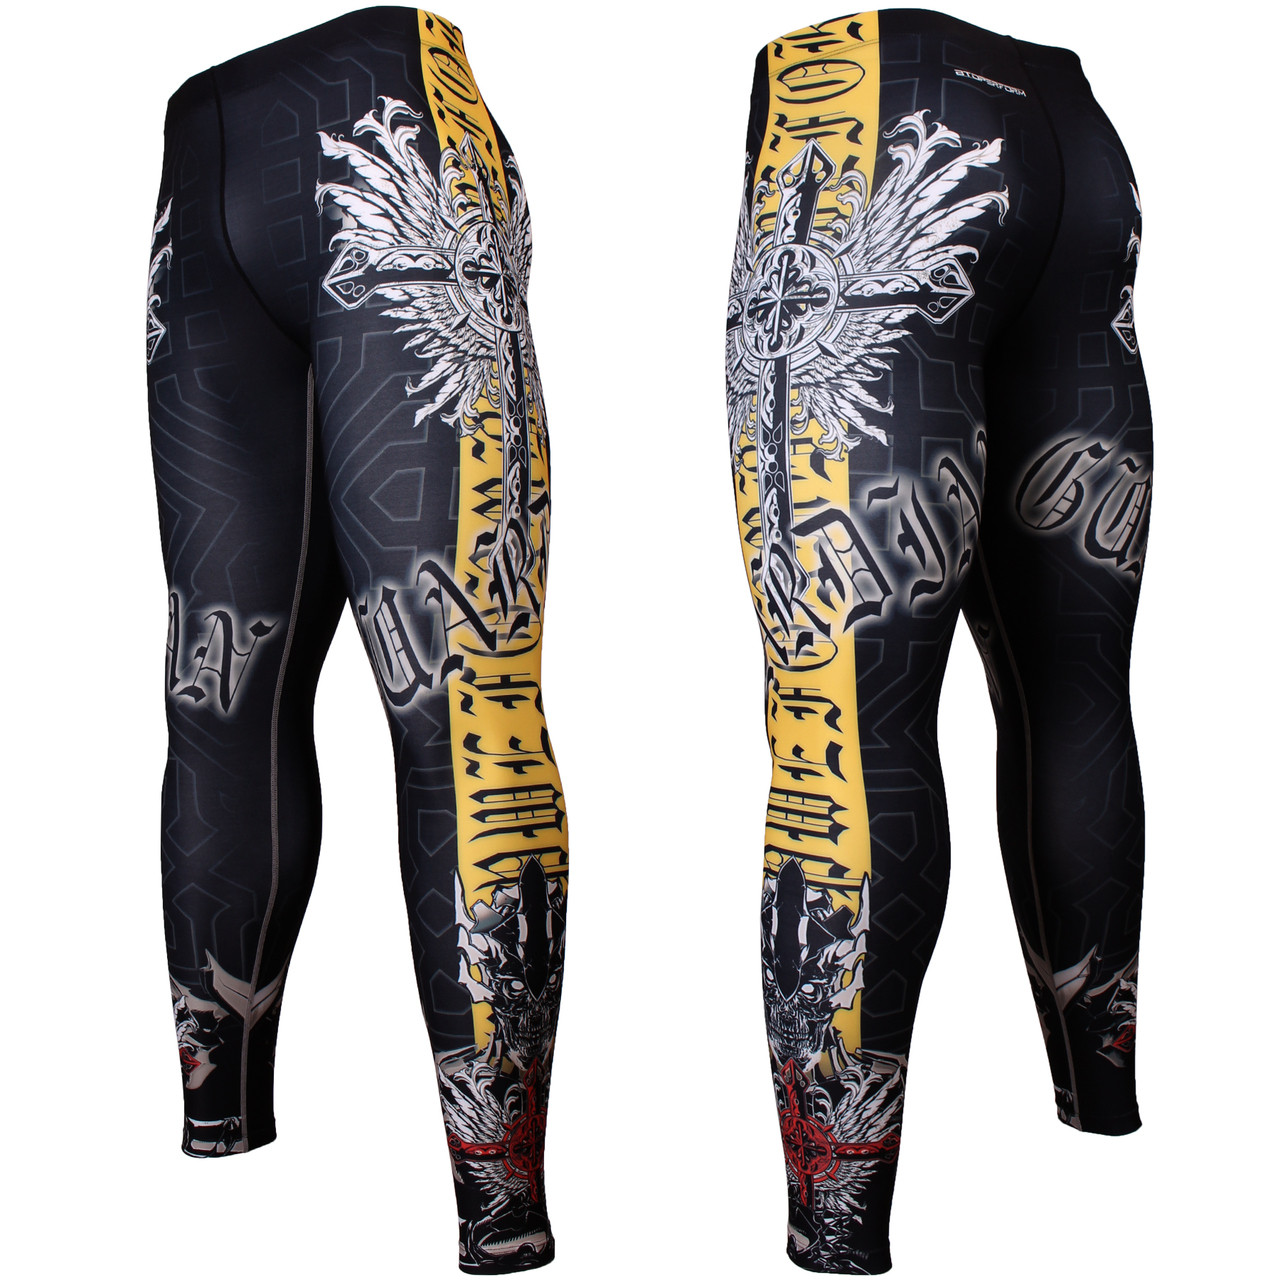 GUARDIAN [FY-132] Full graphic compression leggings